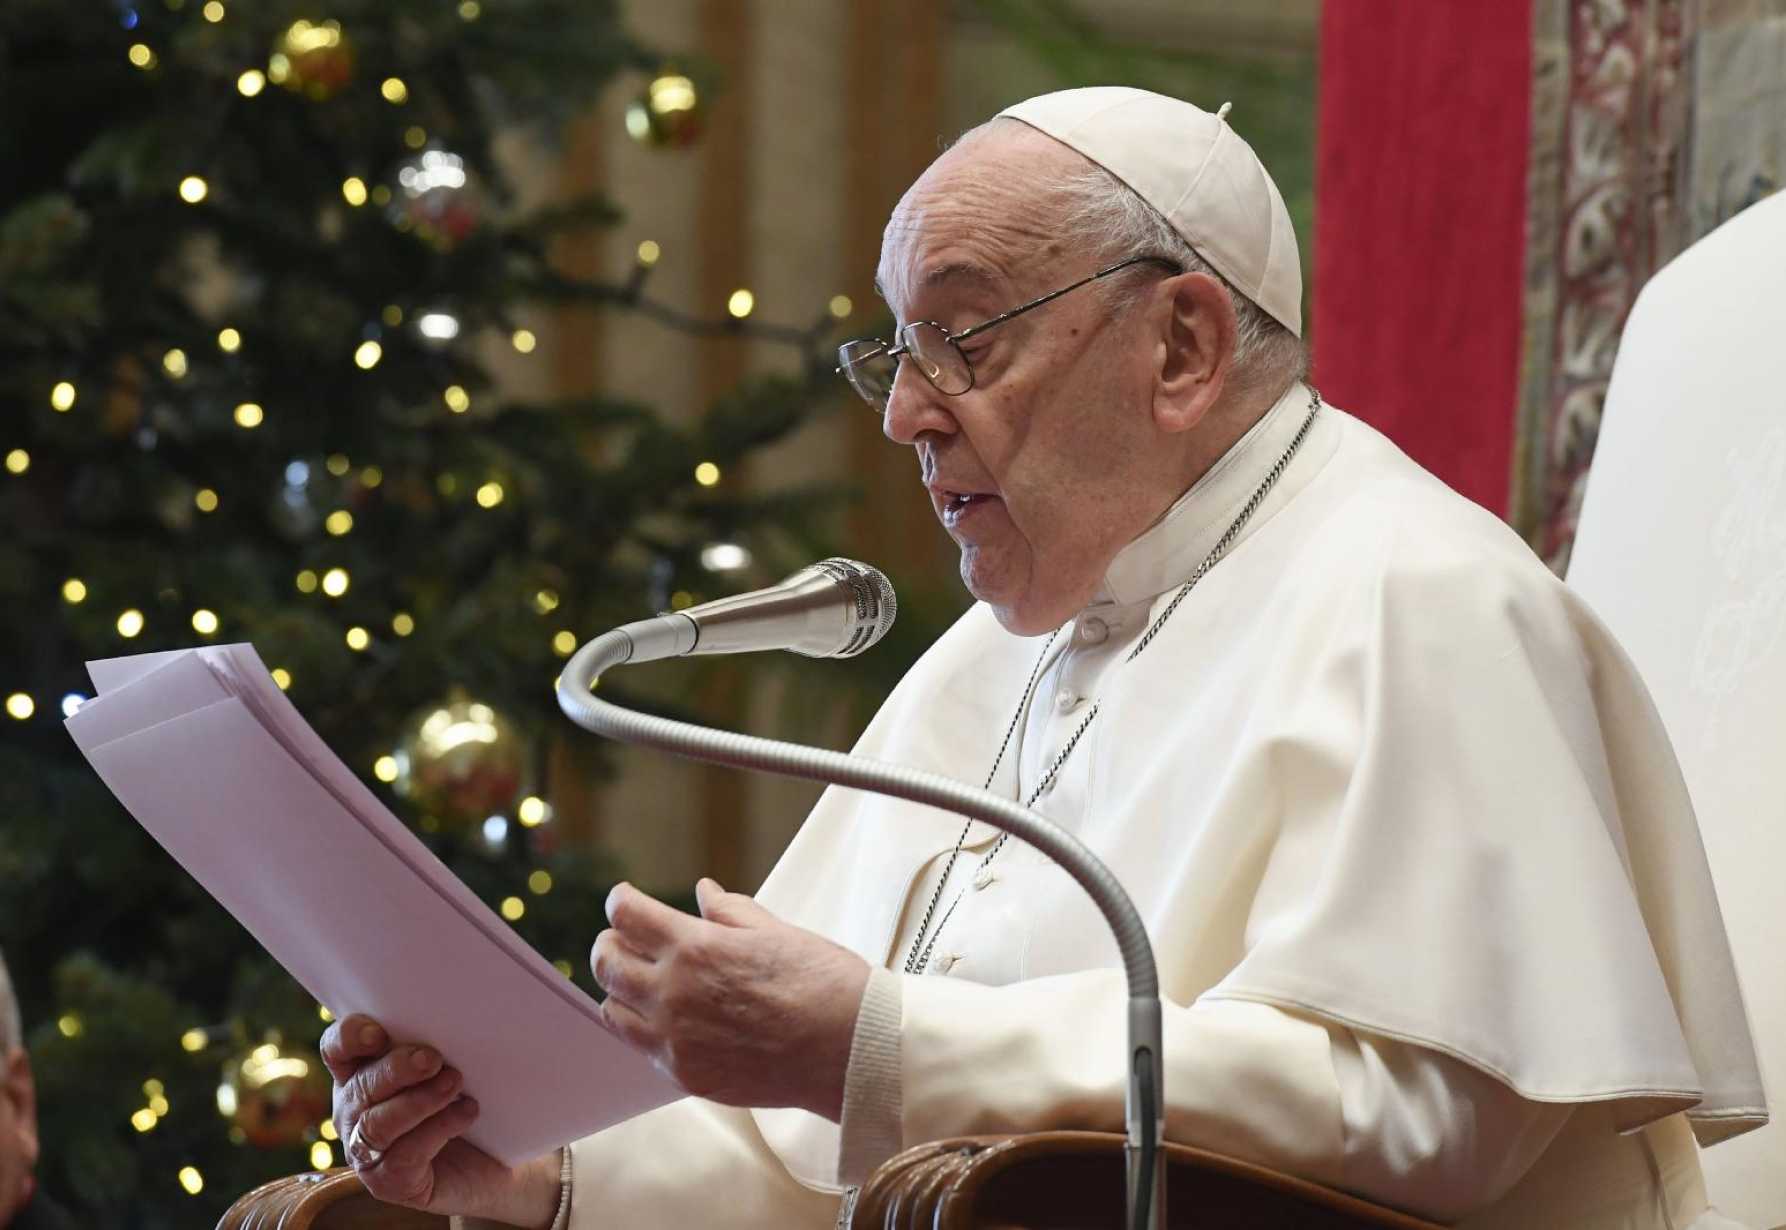 Listening: It's not a fast-paced game of ping pong, pope tells Curia